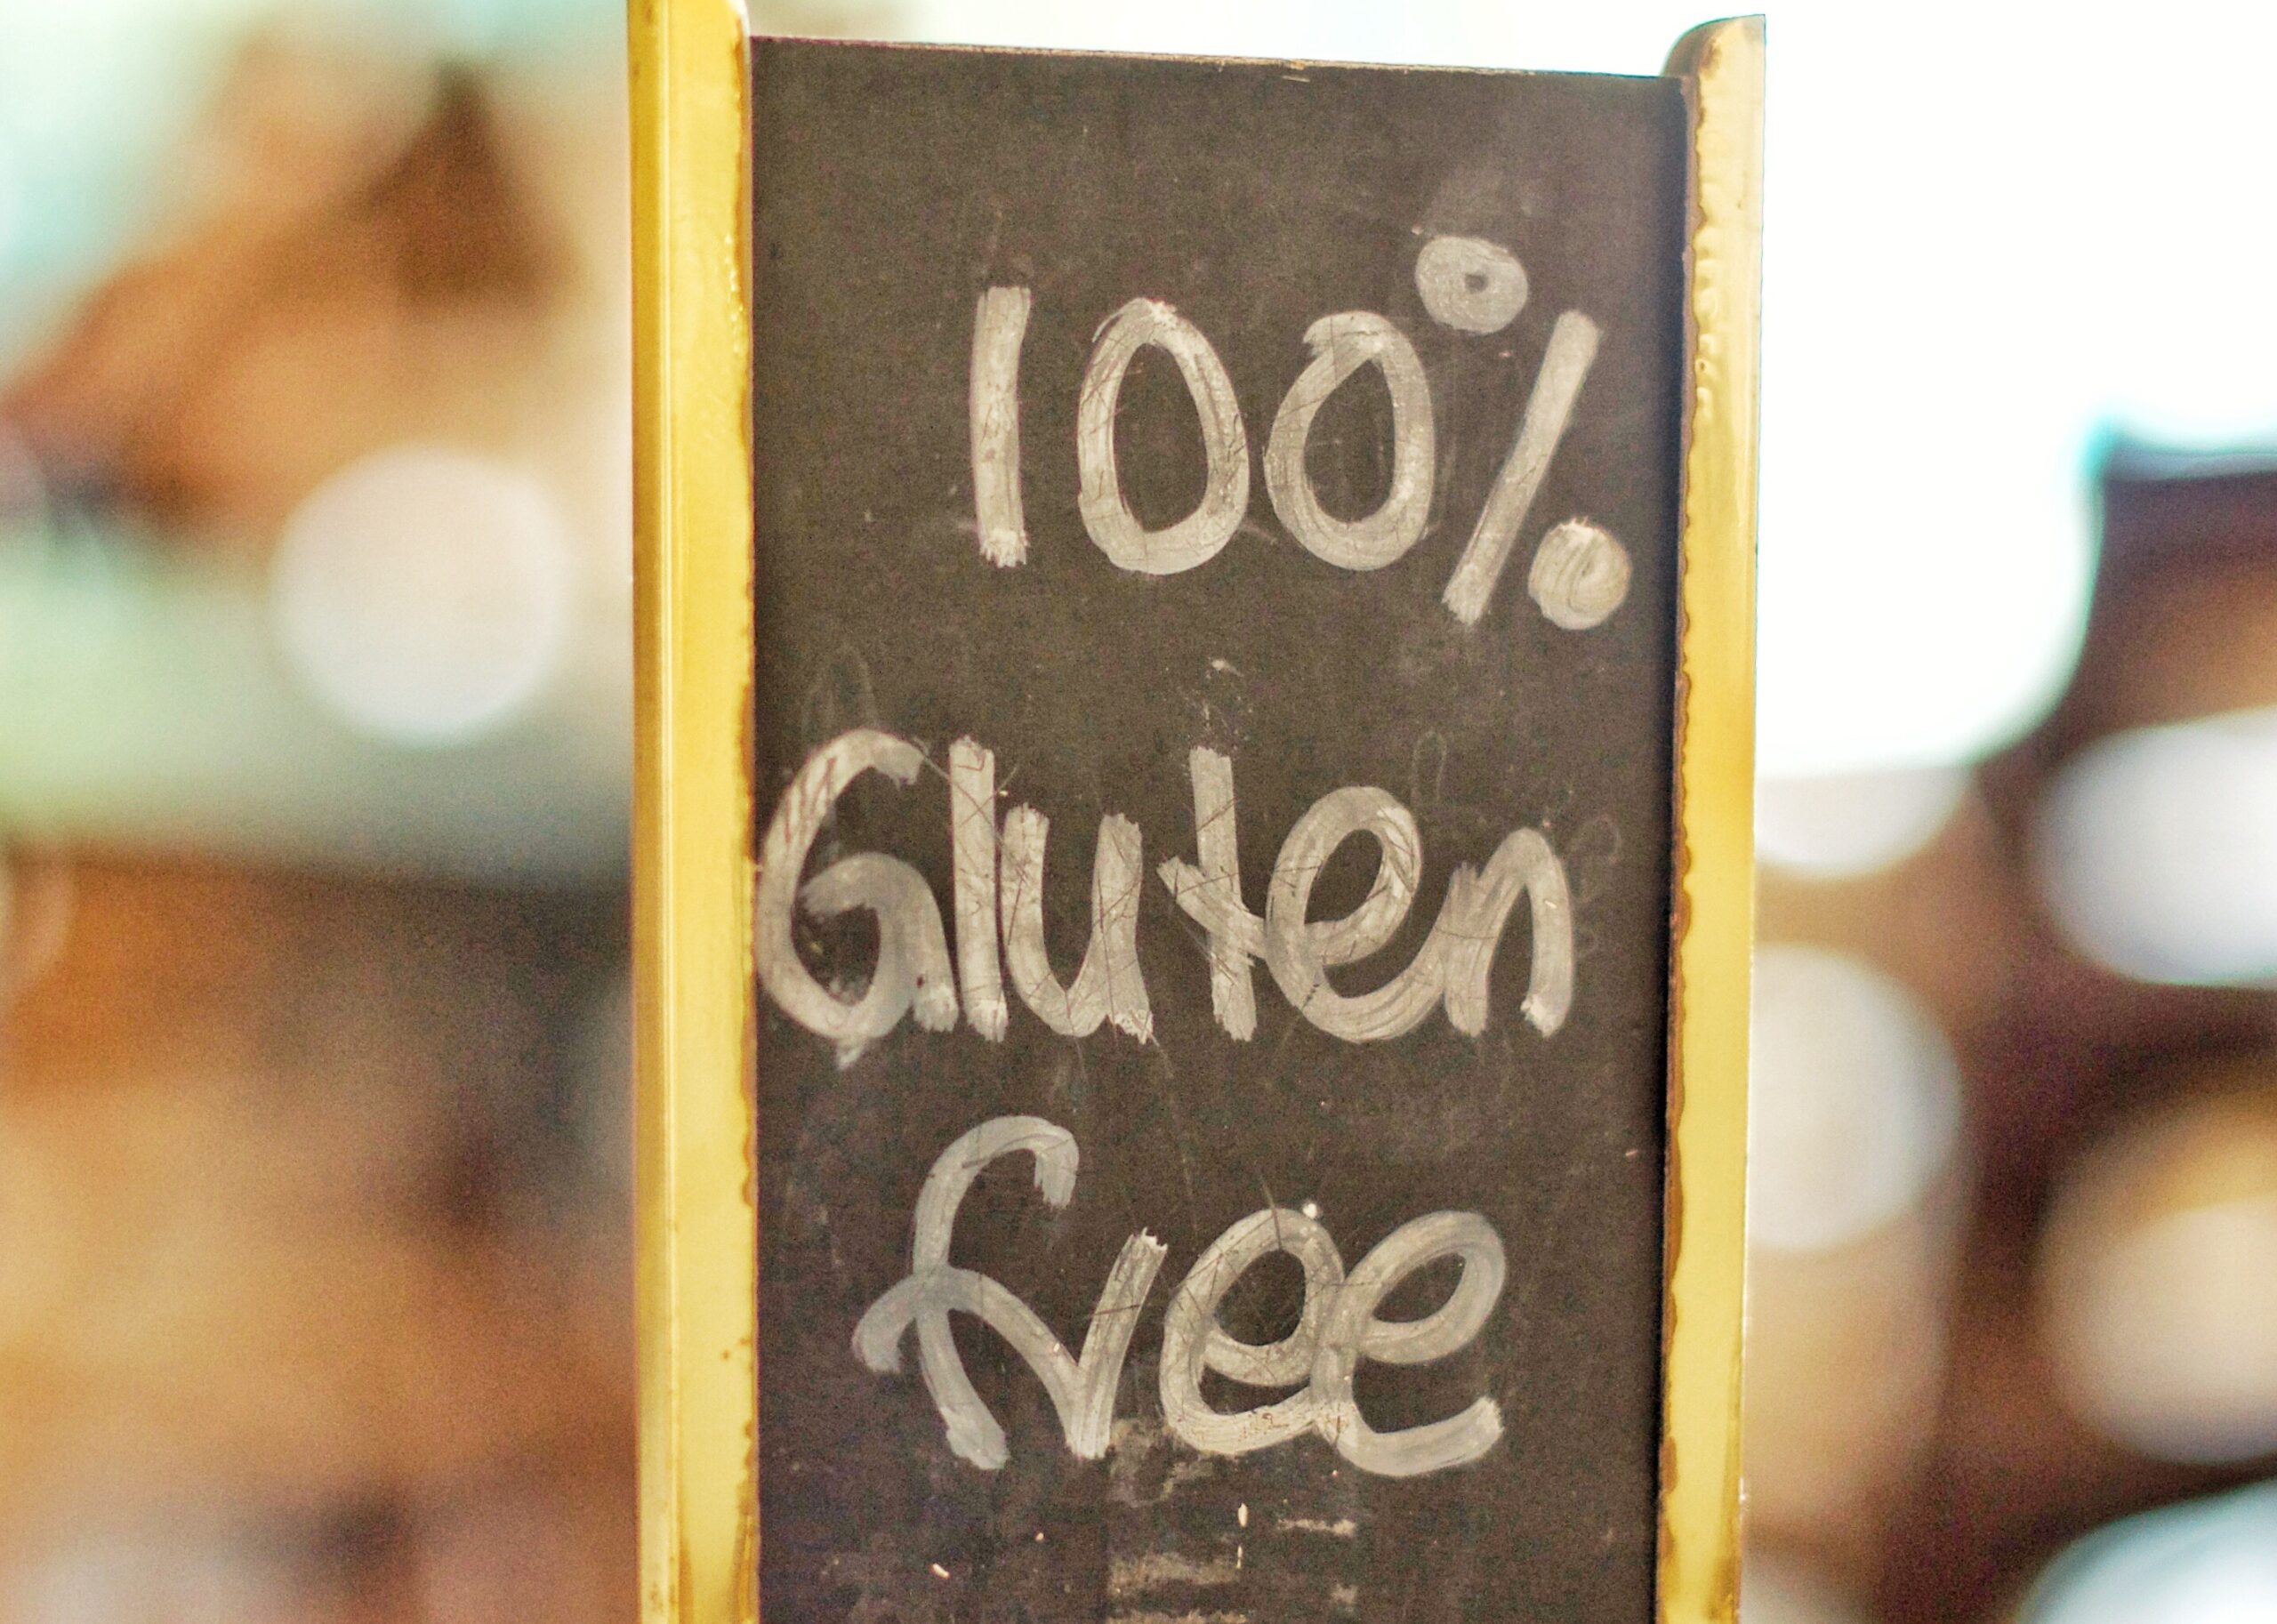 Healthy Eating ”100% Gluten Free” Especially nice for those of us with celiac disease